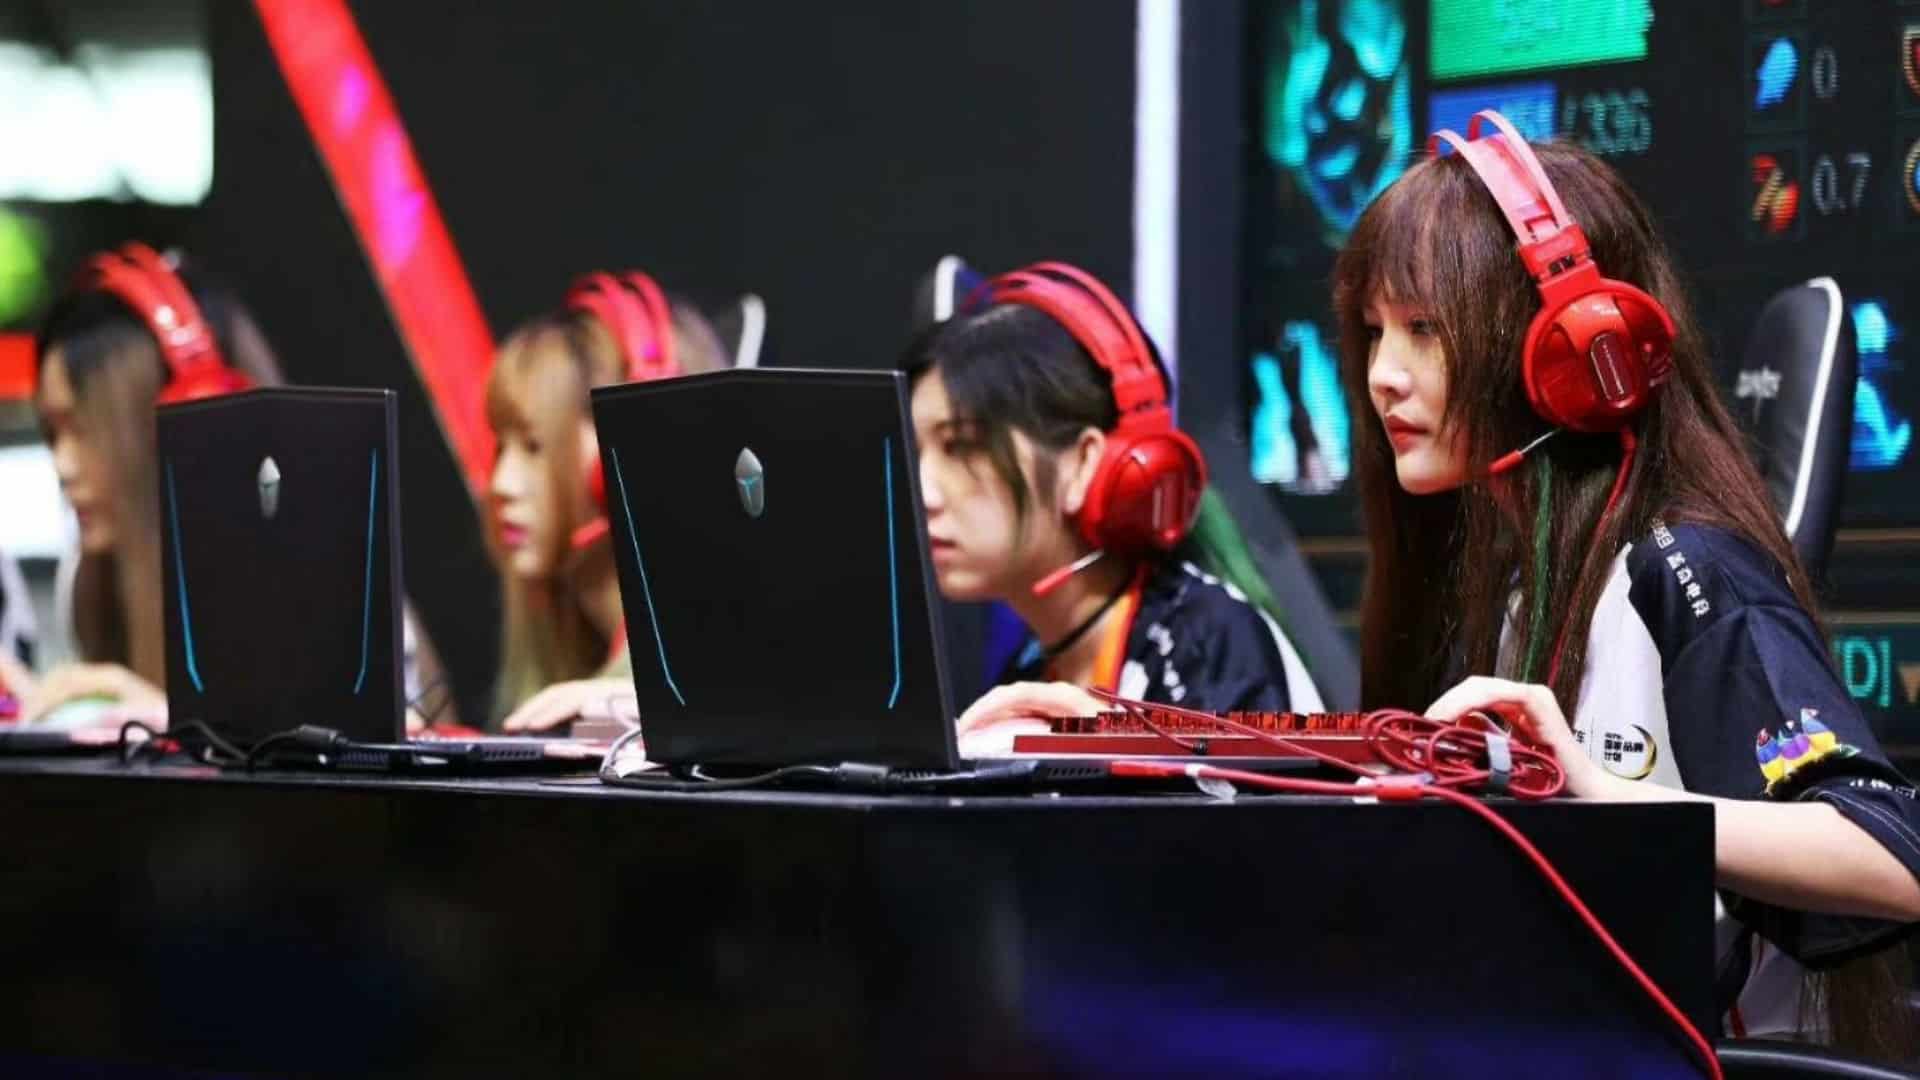 Competitive gaming: More female esports players breaking through